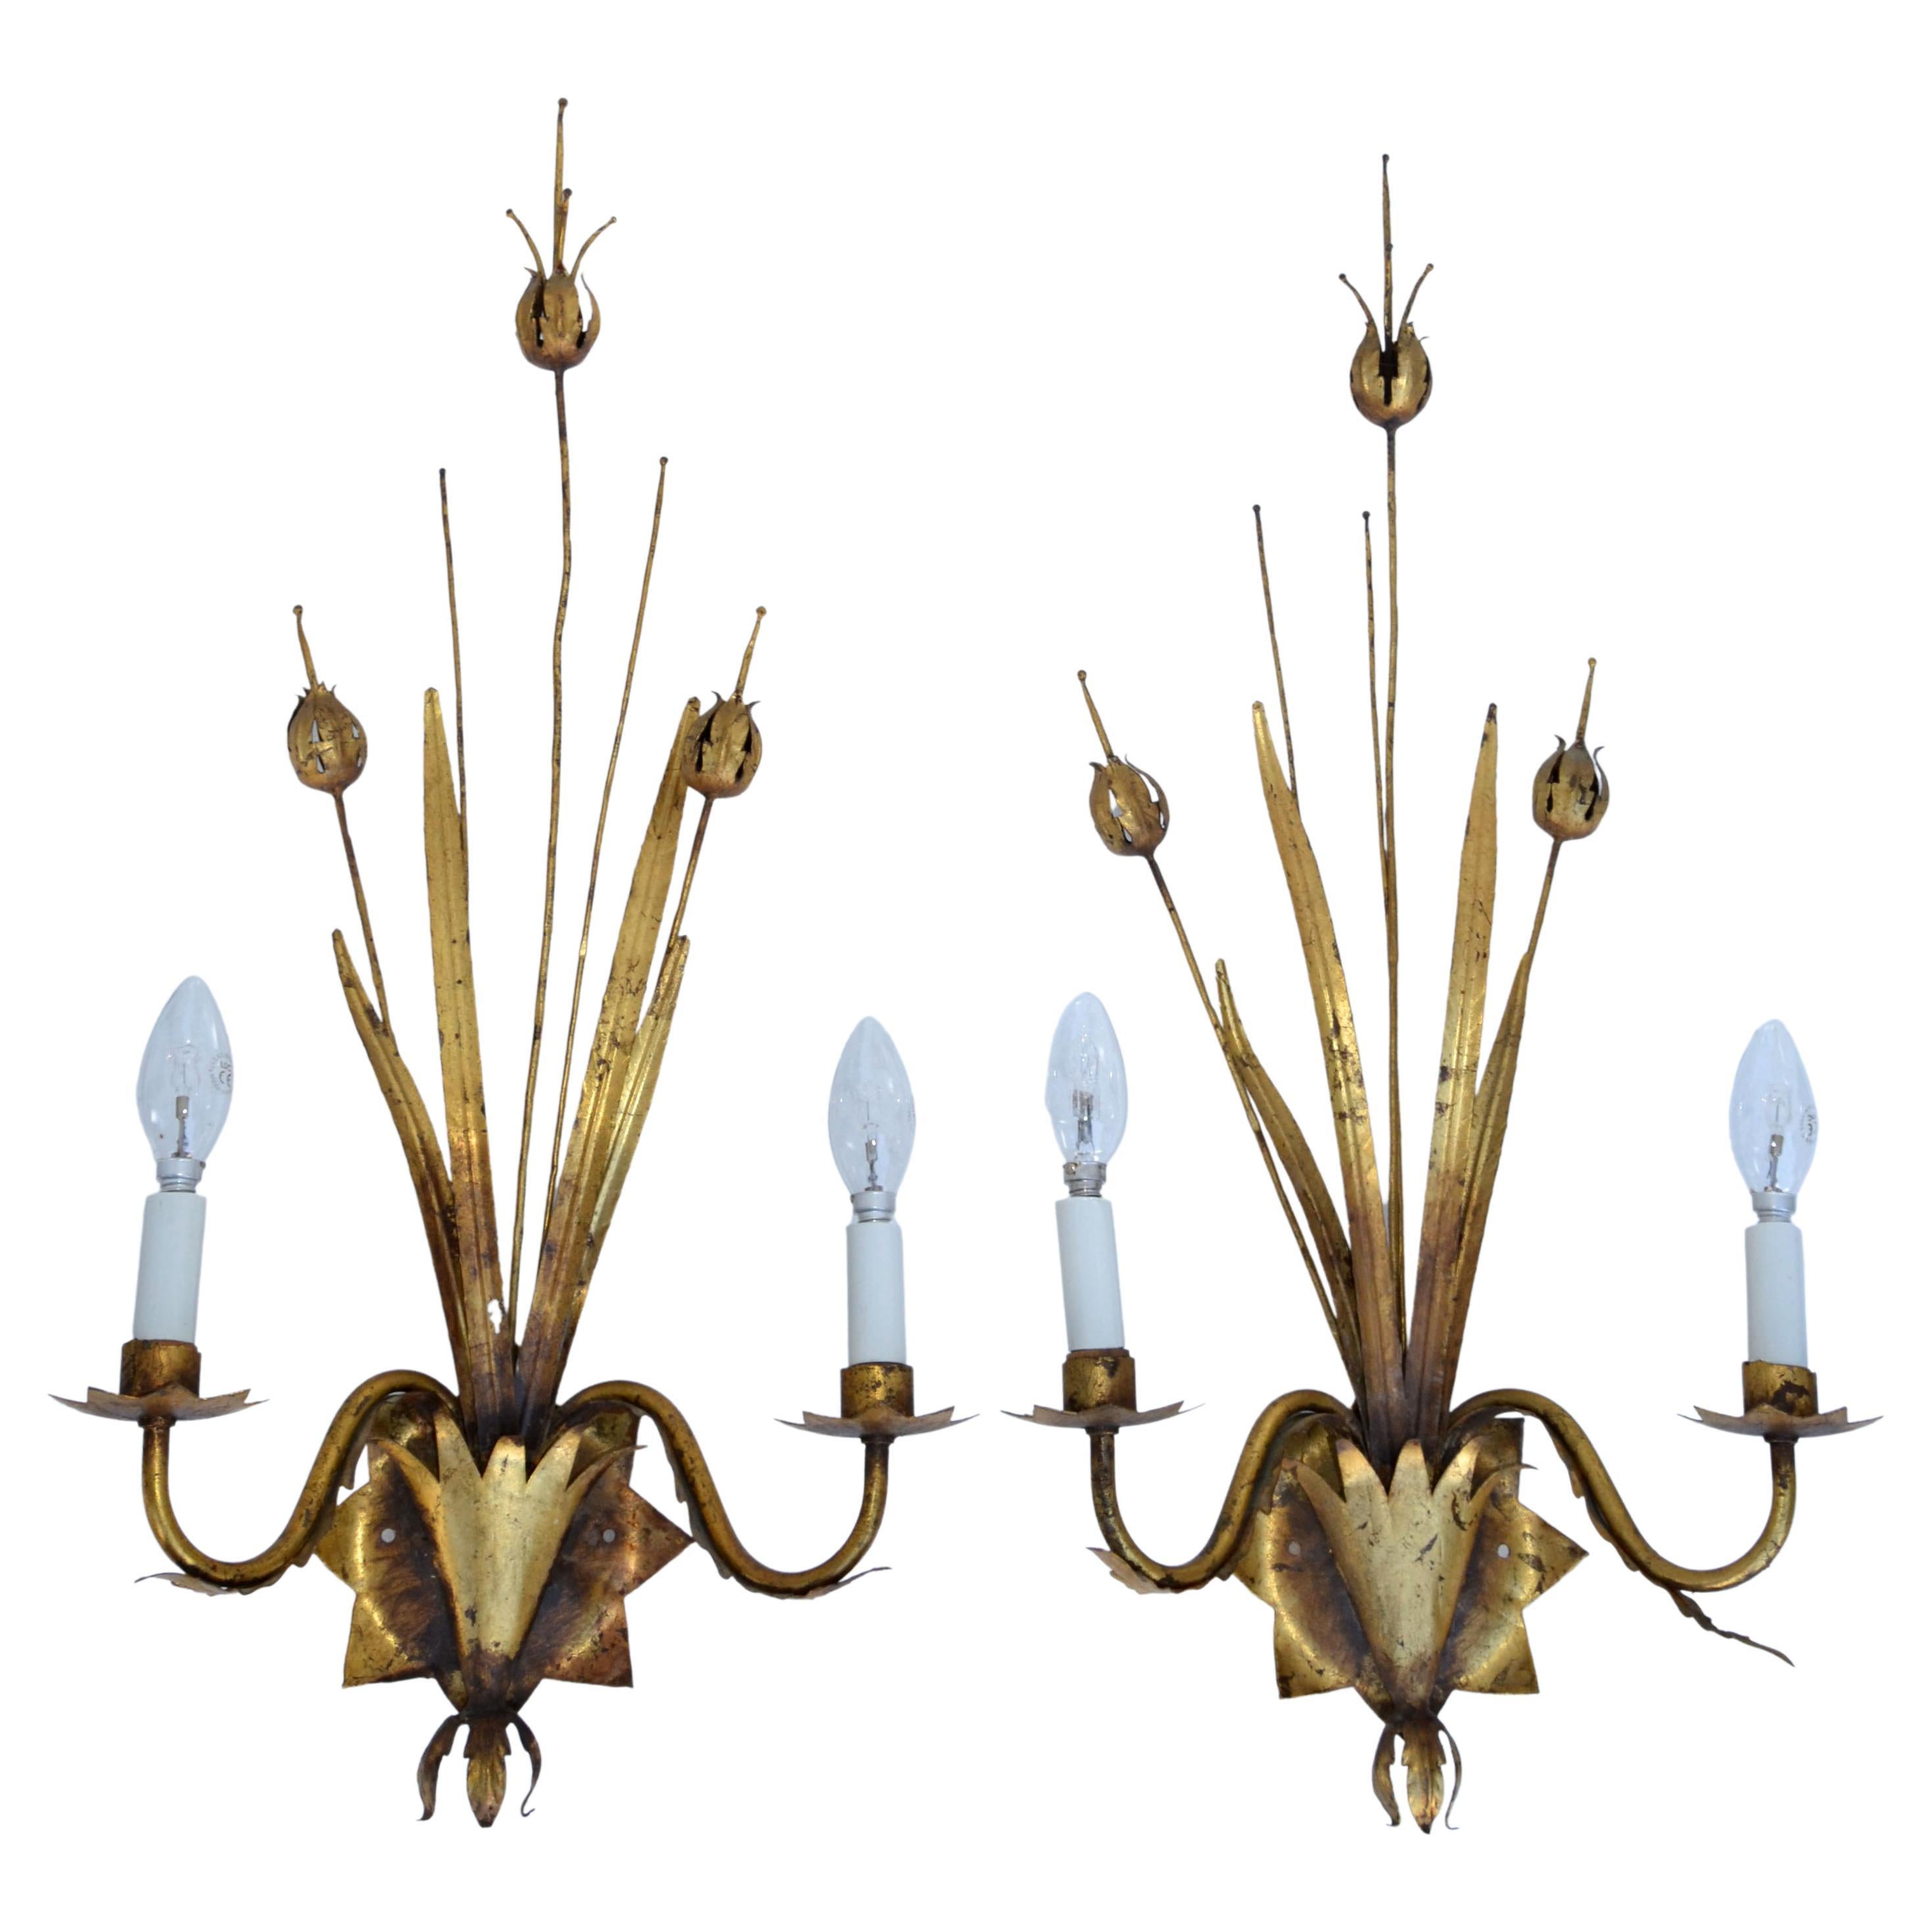 Pair of Large Ferrocolor Sconces Wheat Wall Lights Mid-Century Modern Spain 1960 For Sale